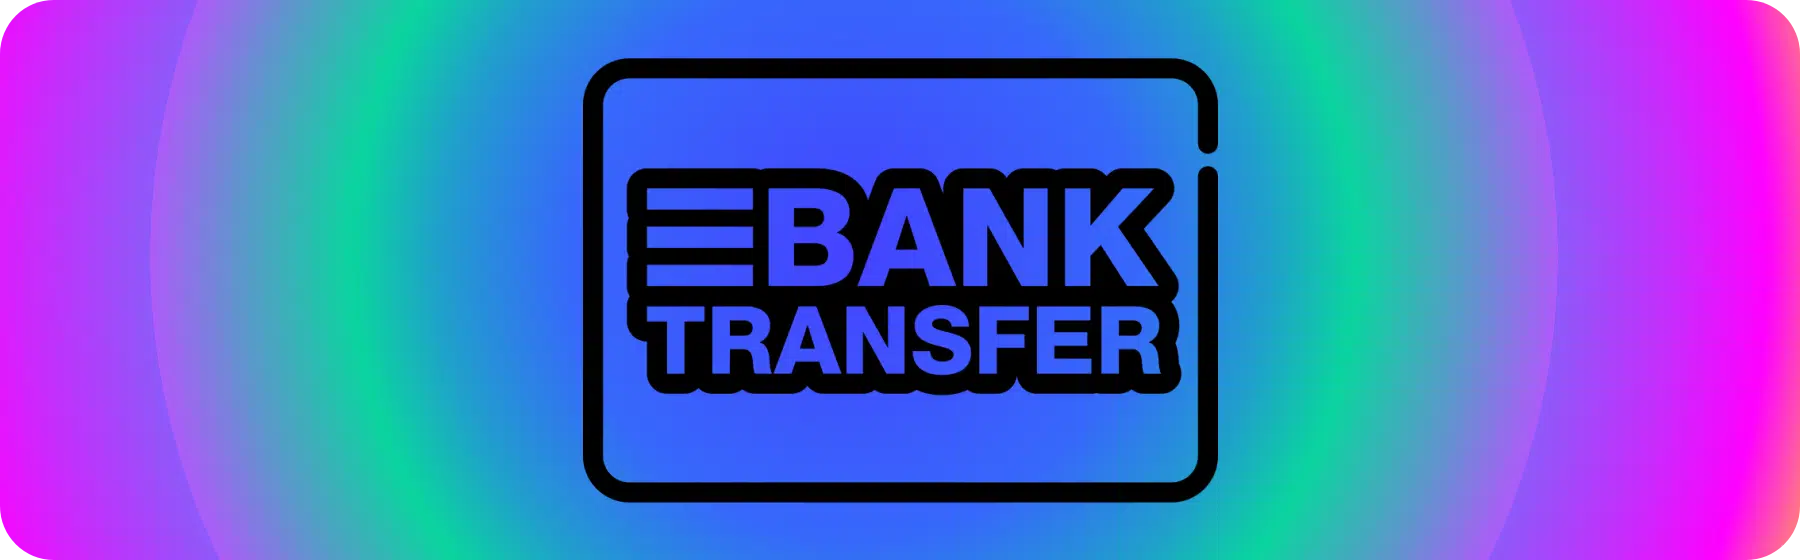 logo for bank transfer payment